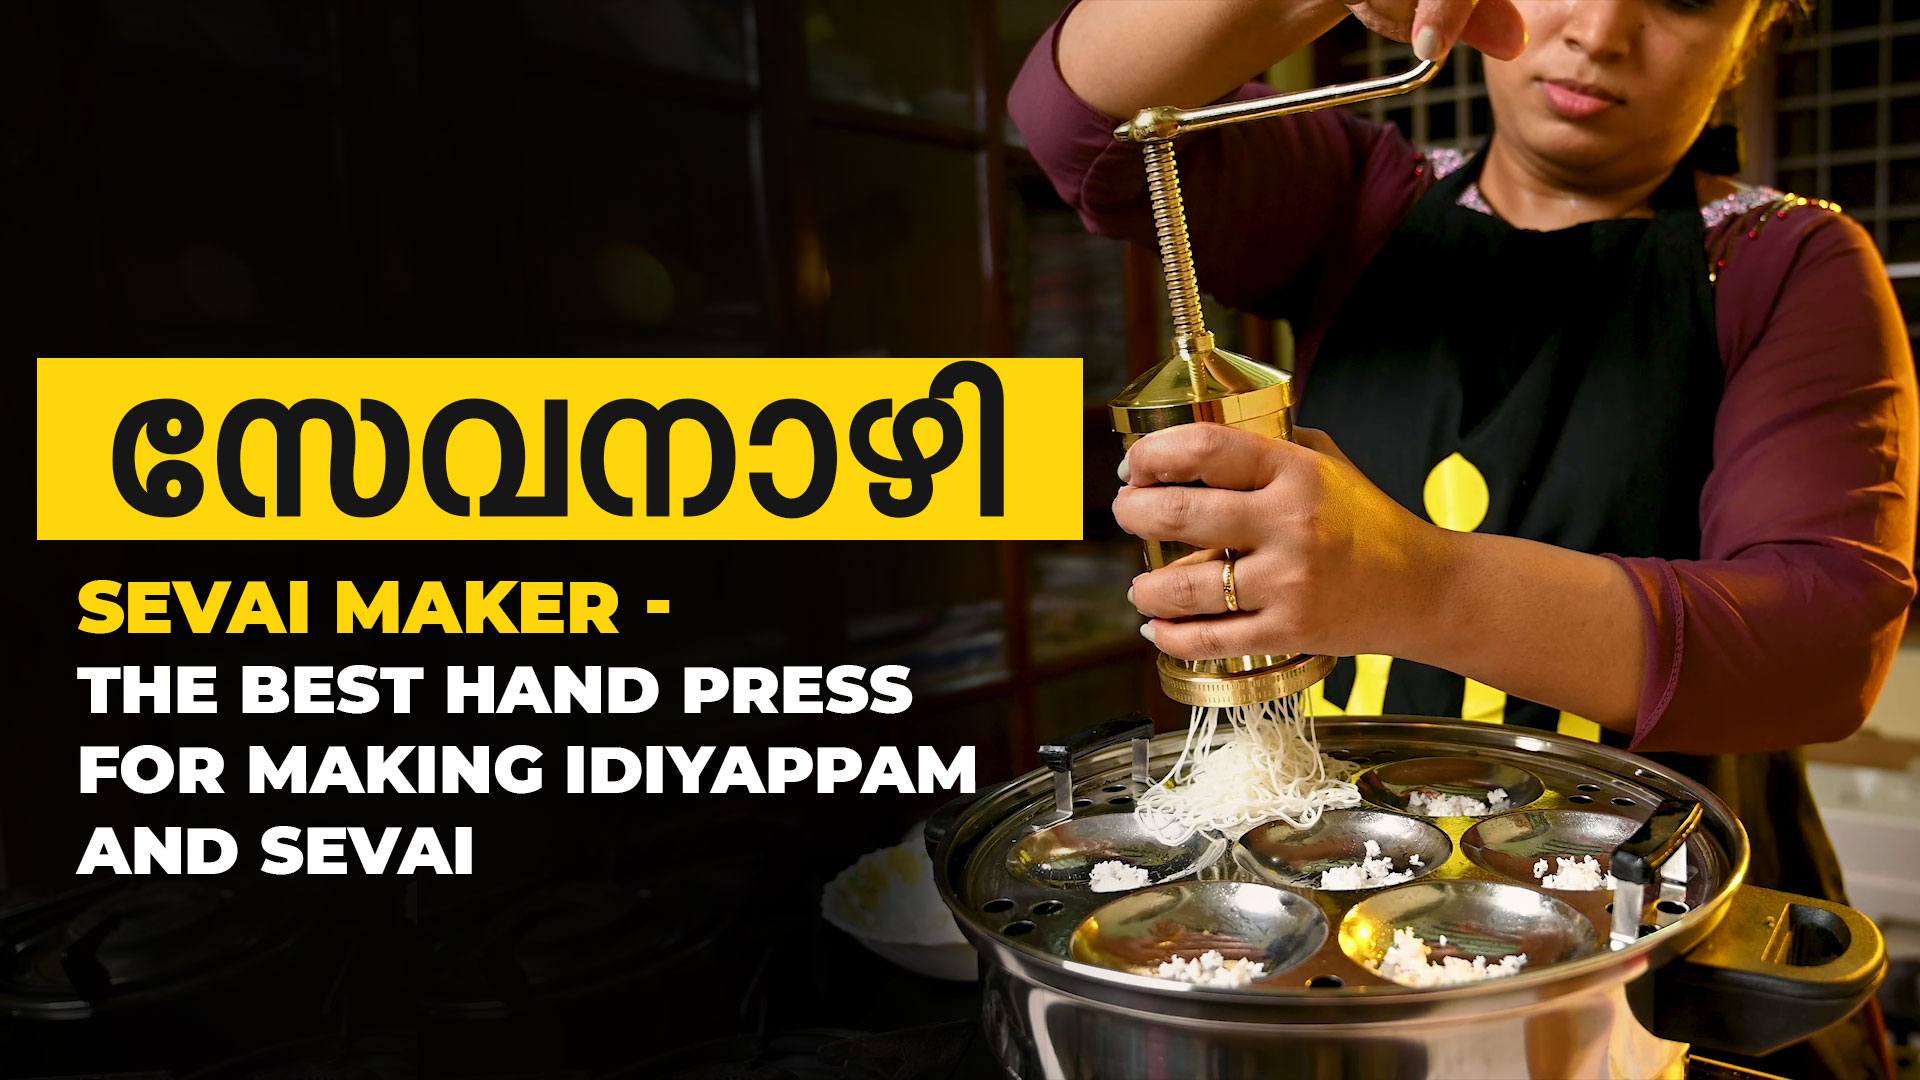 Idiyappam Maker - A Must-Have Kitchen Tool for Making Perfect Idiyappams Every Time!